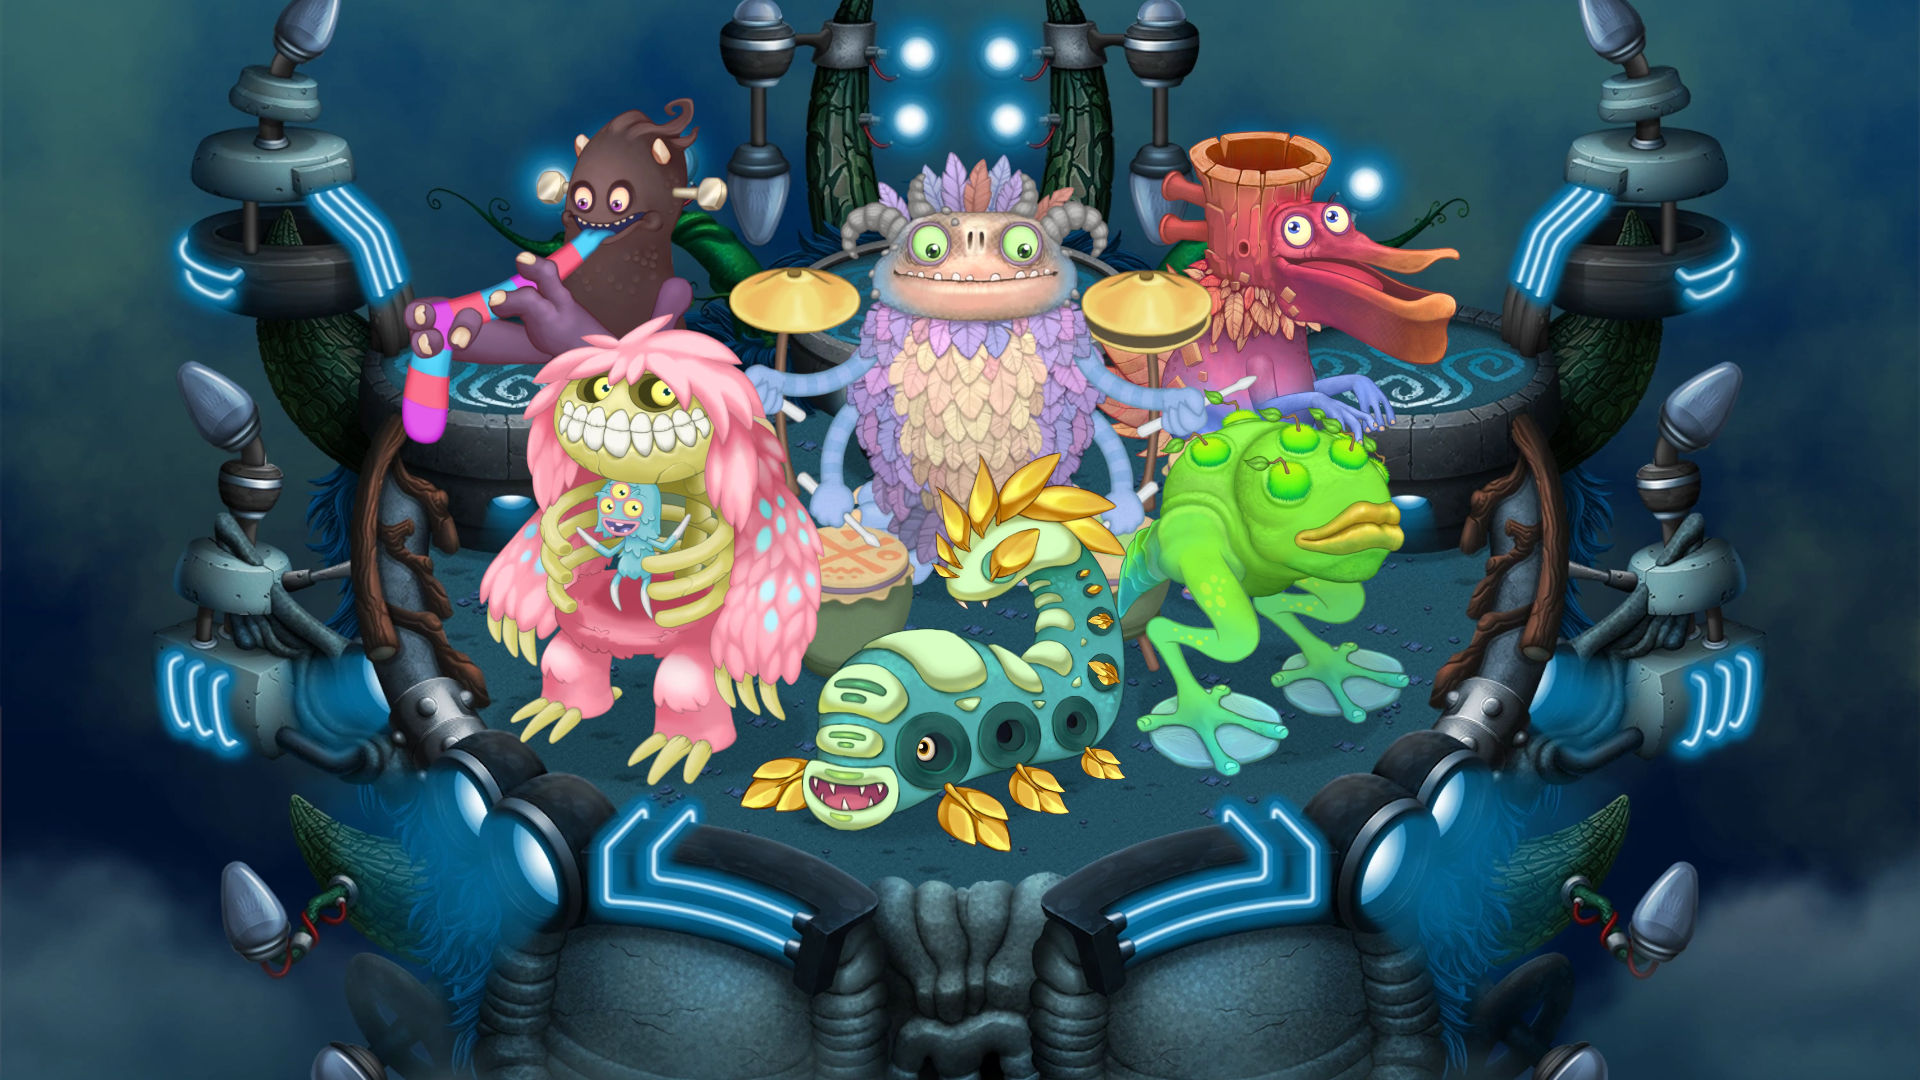 Create a ALL Wubbox - My Singing Monsters (New Gold Island) Tier